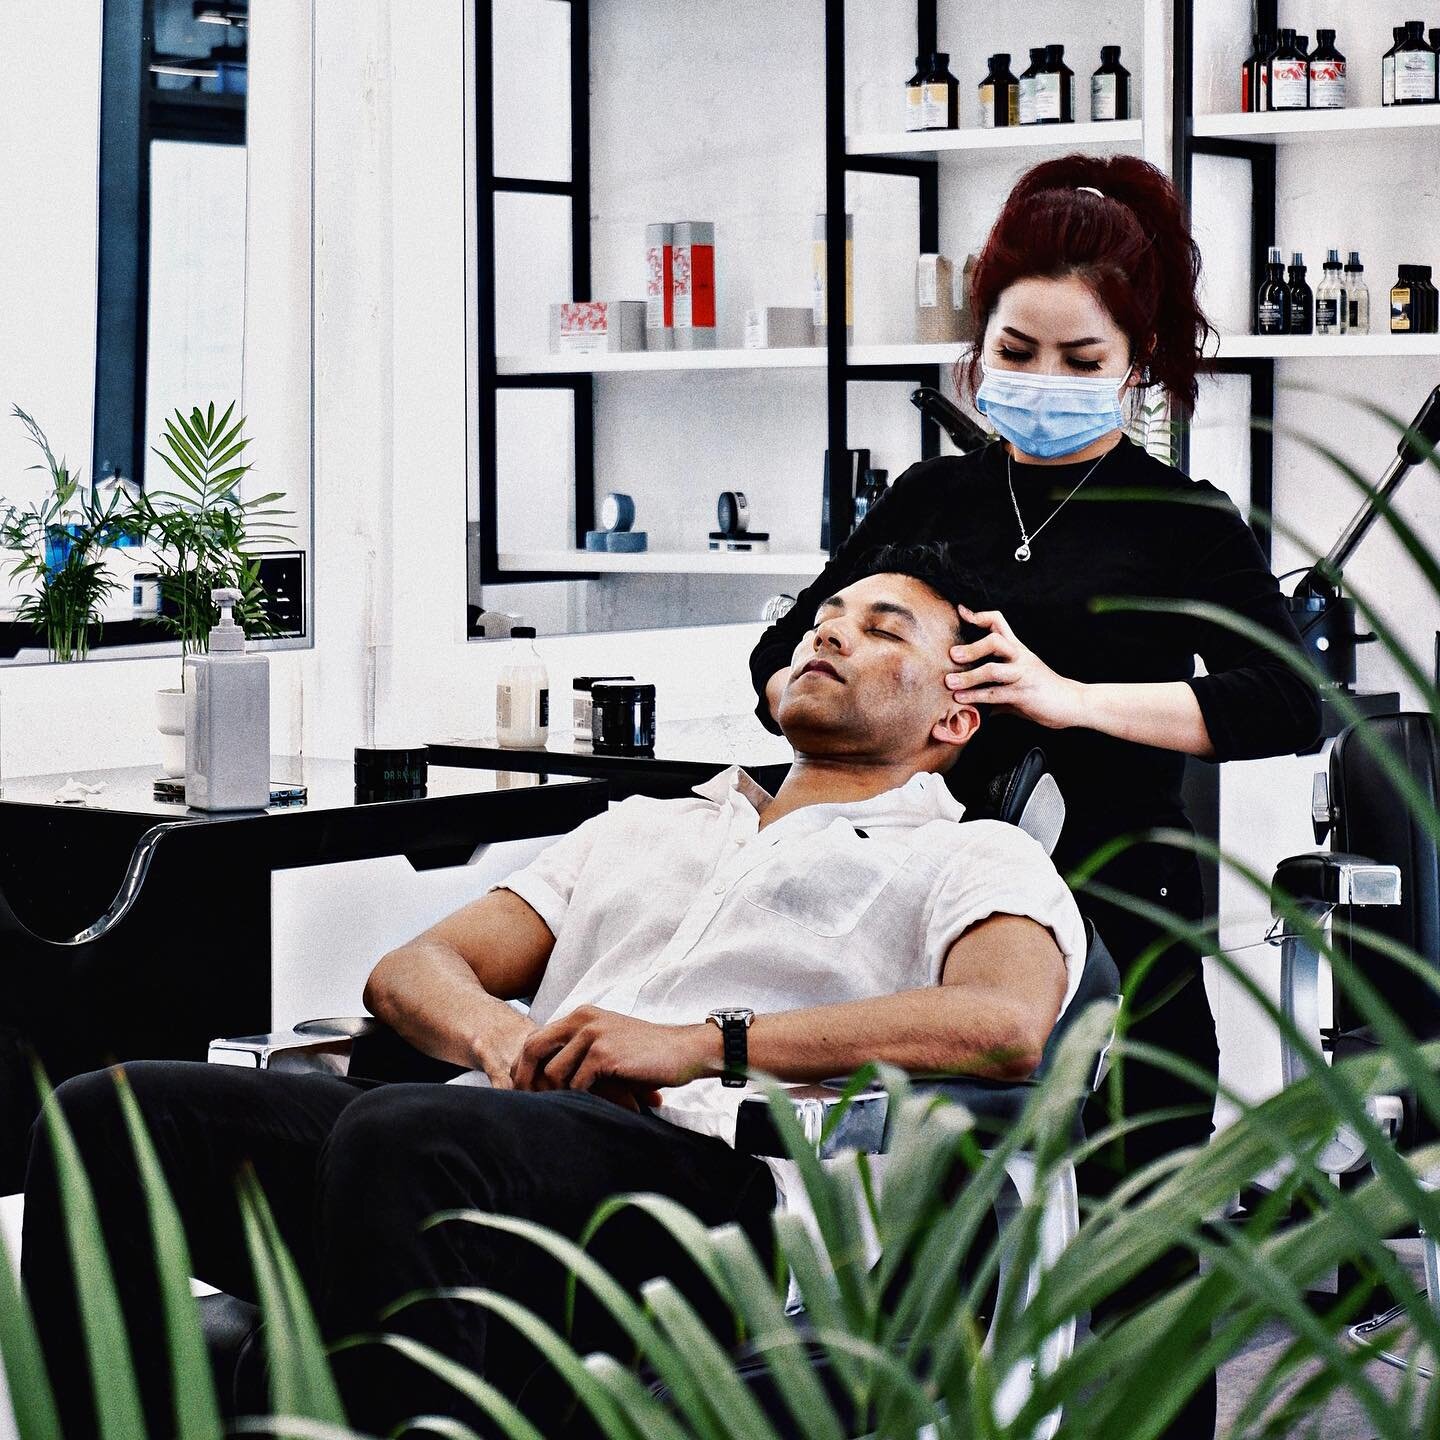 Re-energize yourself with YARD&rsquo;s 30 minute scalp and shoulder massage. 

Benefits: 

- Relieves tension 
- Improves blood circulation 
- Eases headache pain
- Improves mood 
- Energy boost

#yardbarbershop #mensbarbershop #menshair #barbershopd